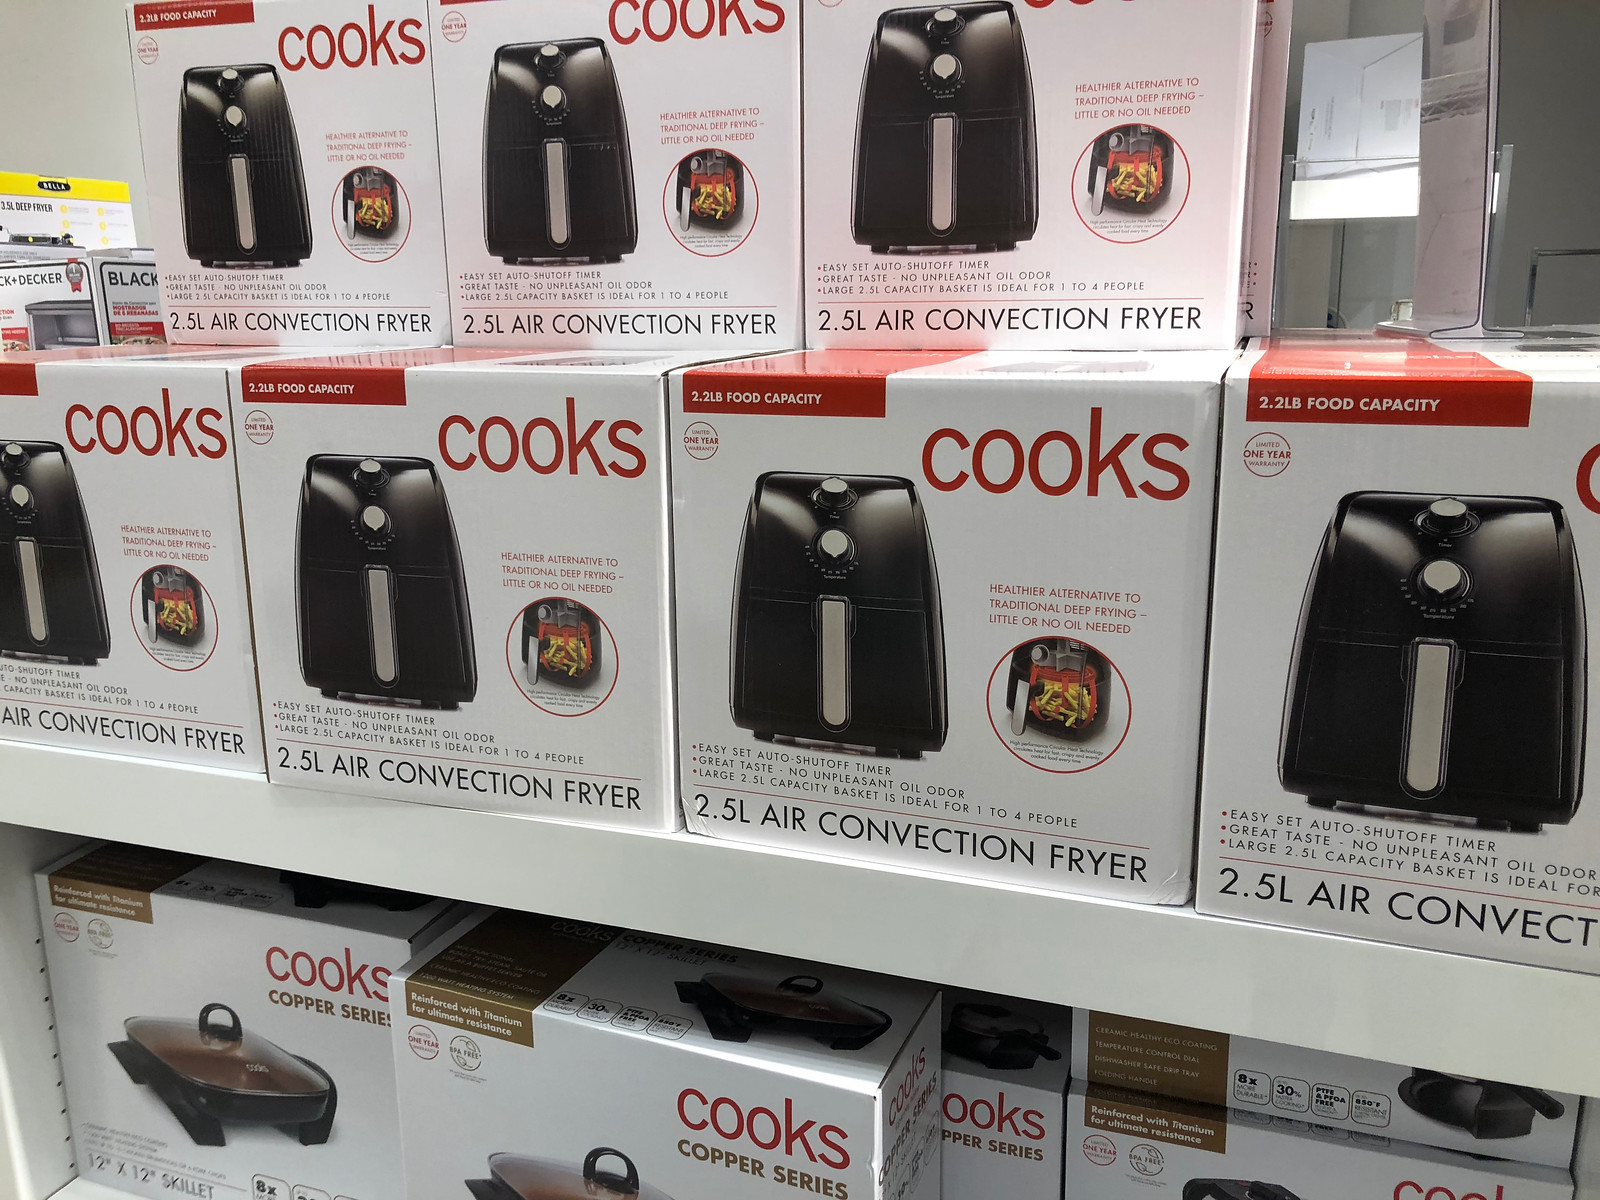 cooks-2-5l-air-fryer-only-29-99-after-jcpenney-rebate-regularly-140